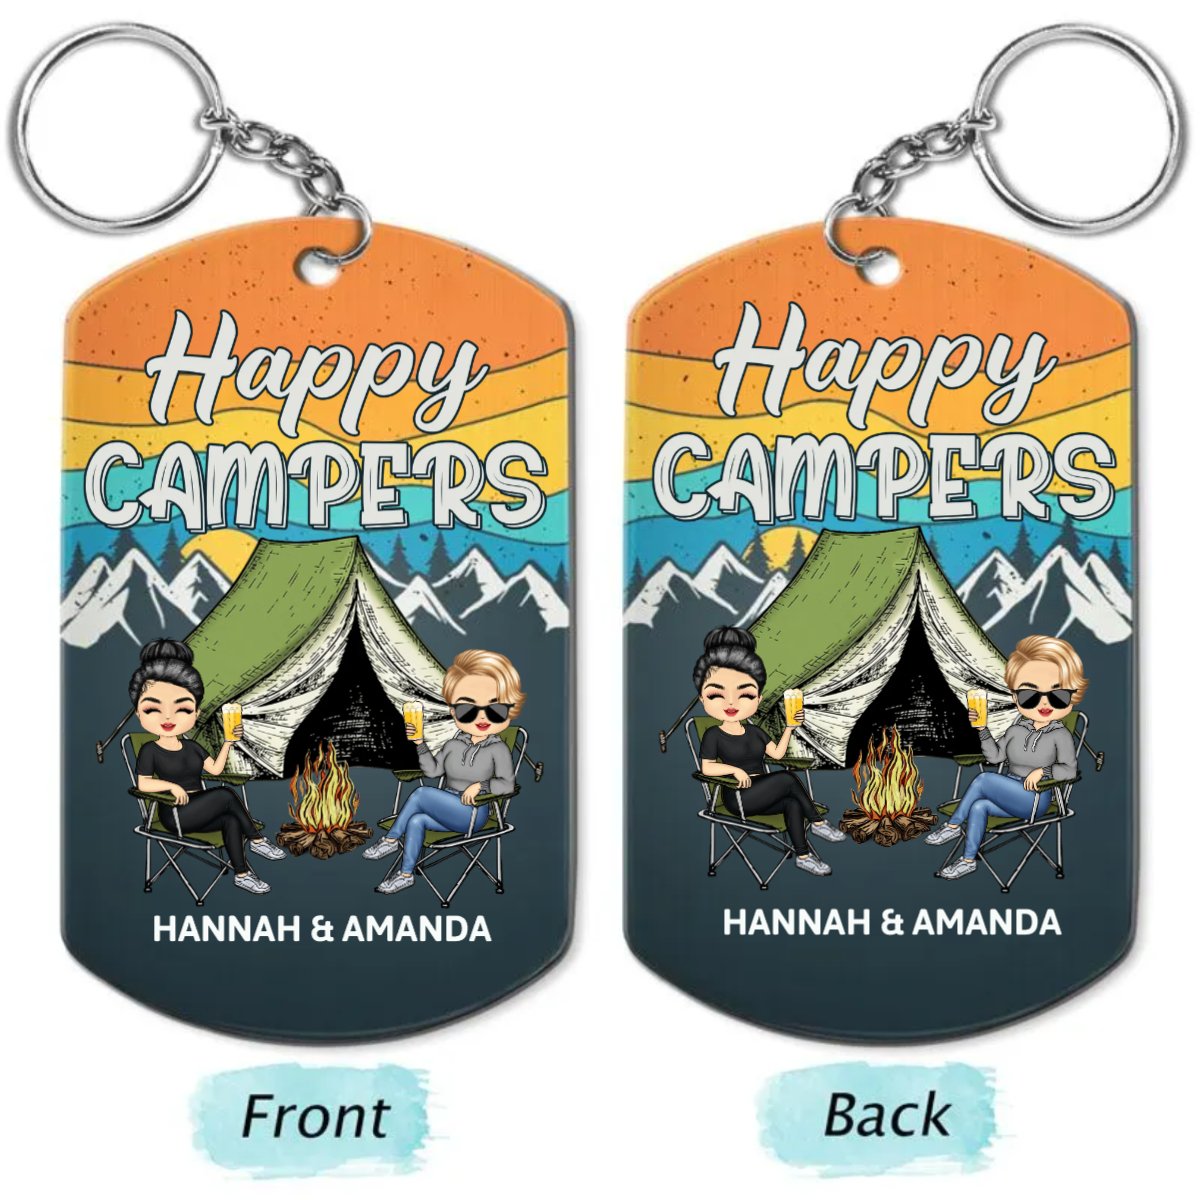 Camping Lovers - Keys To The Camper - Personalized Aluminum Keychain - The Next Custom Gift